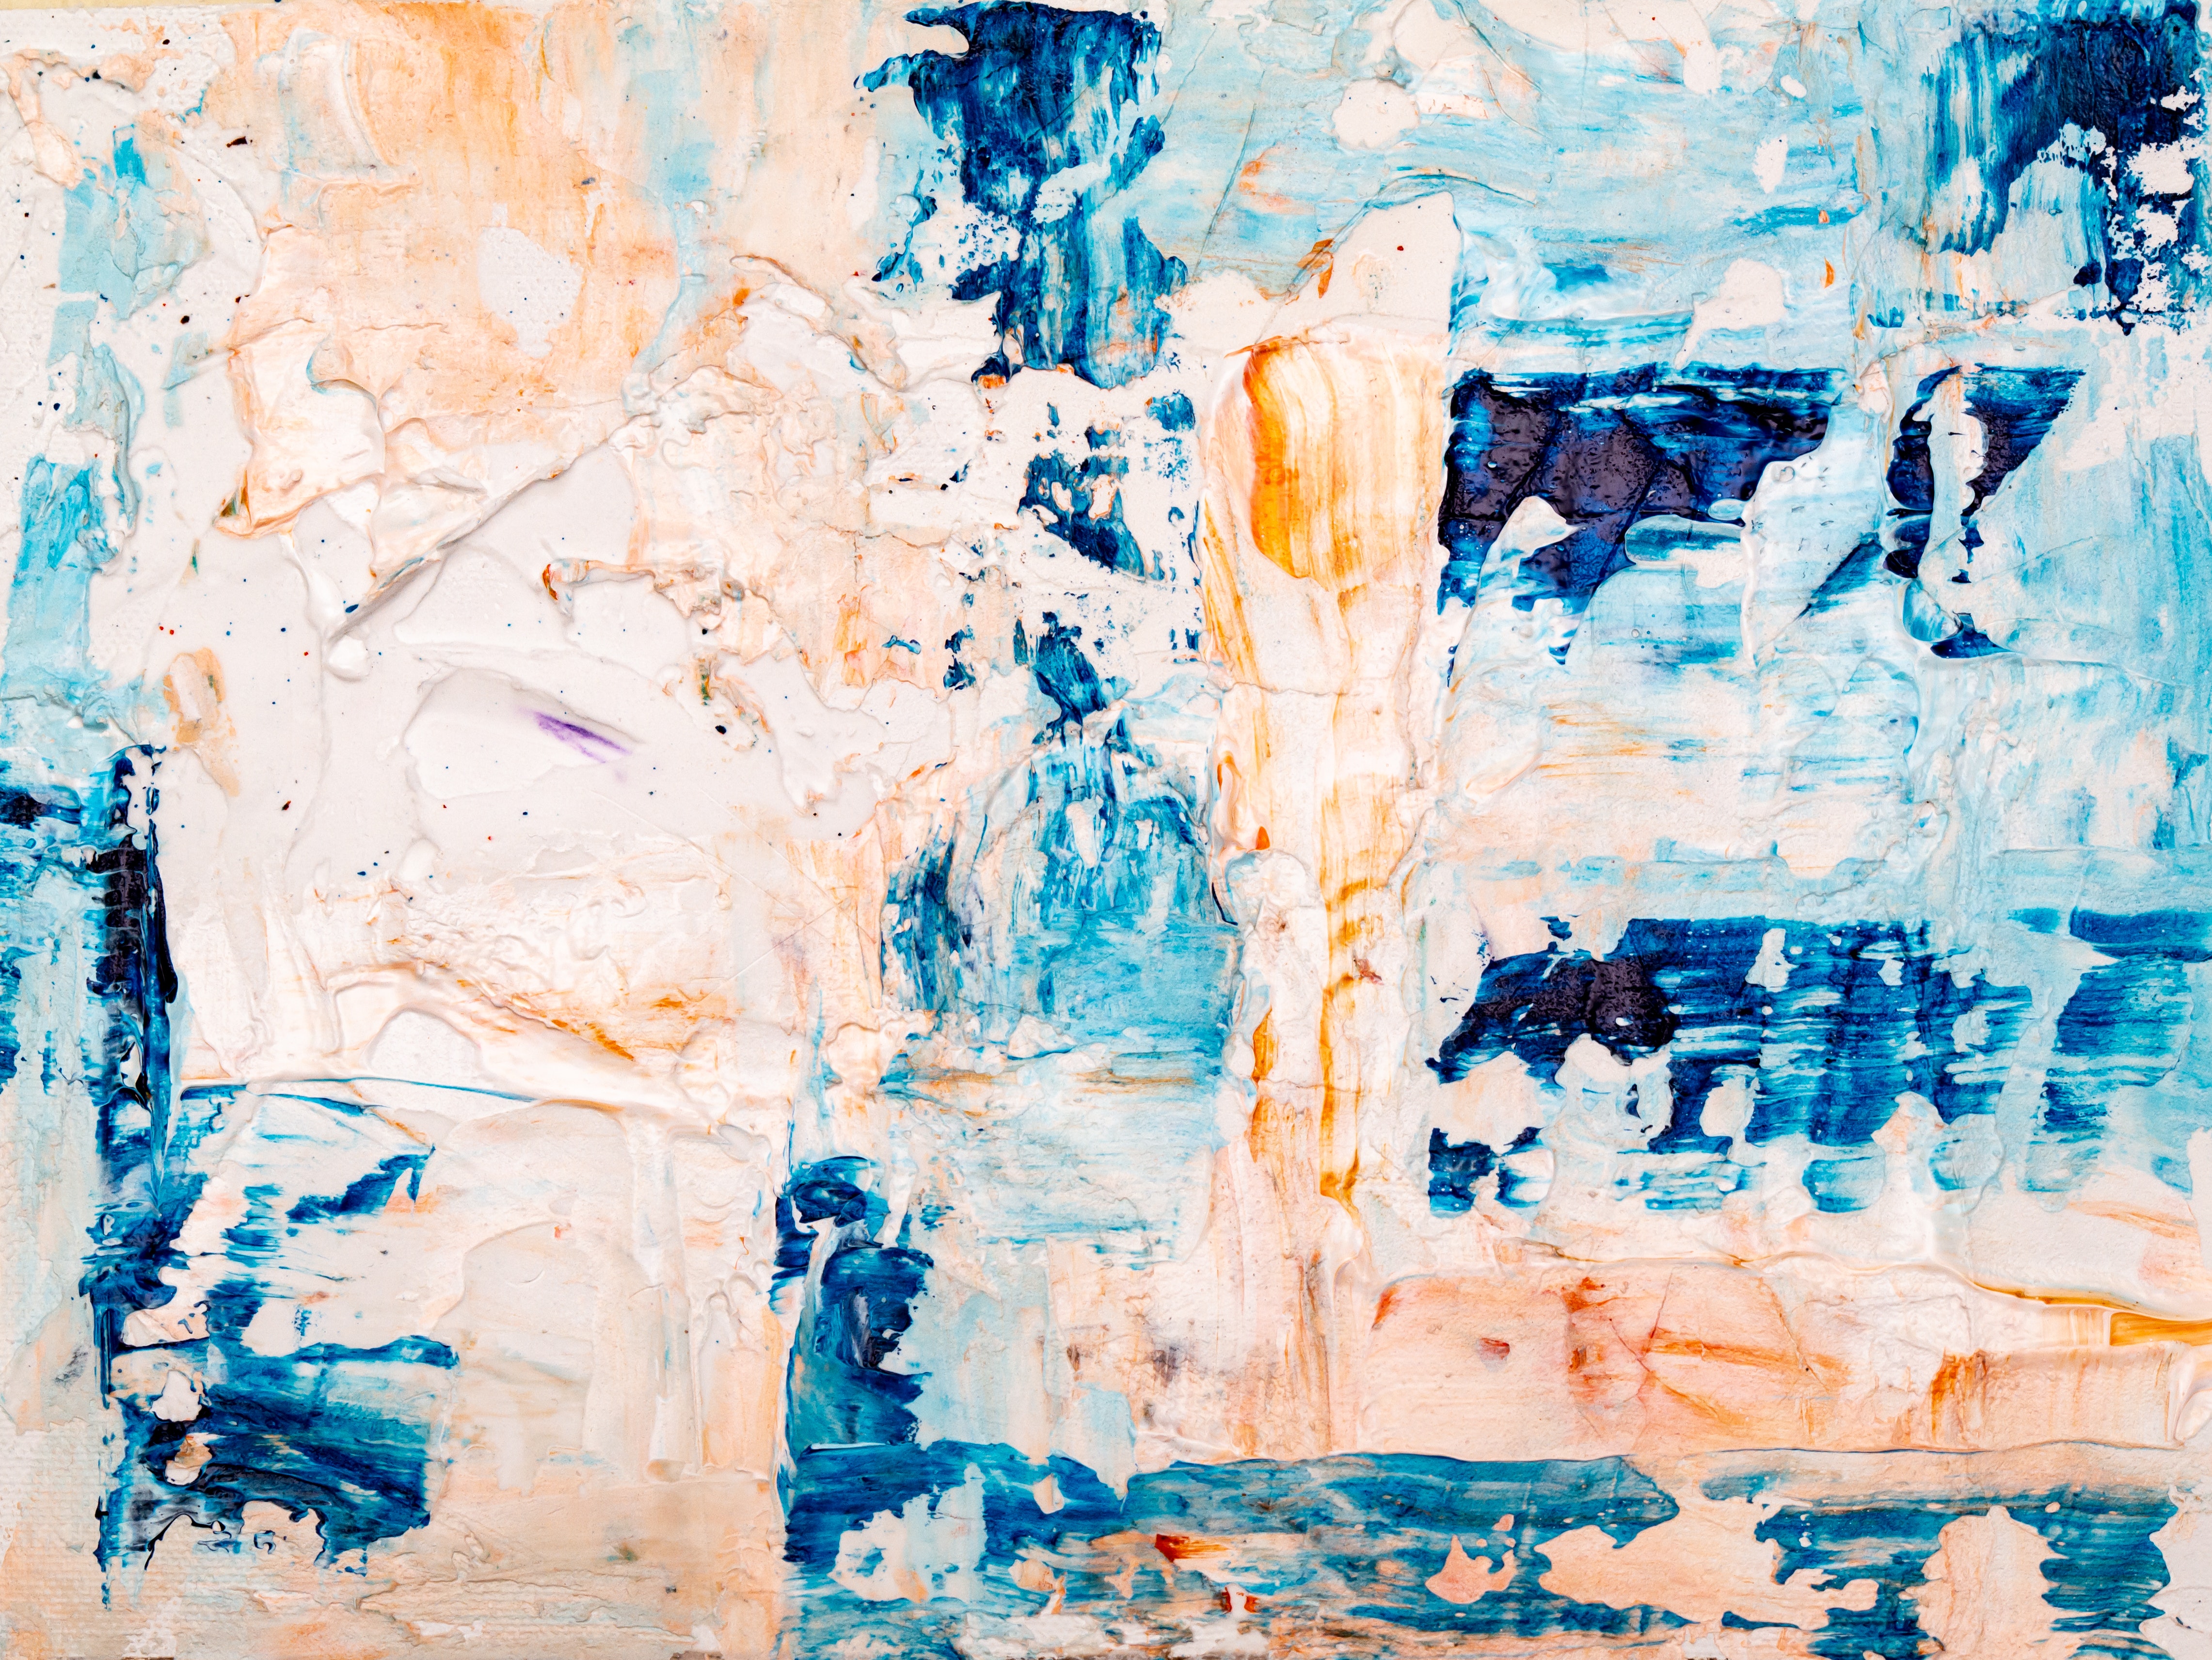 A beige and blue abstract painting